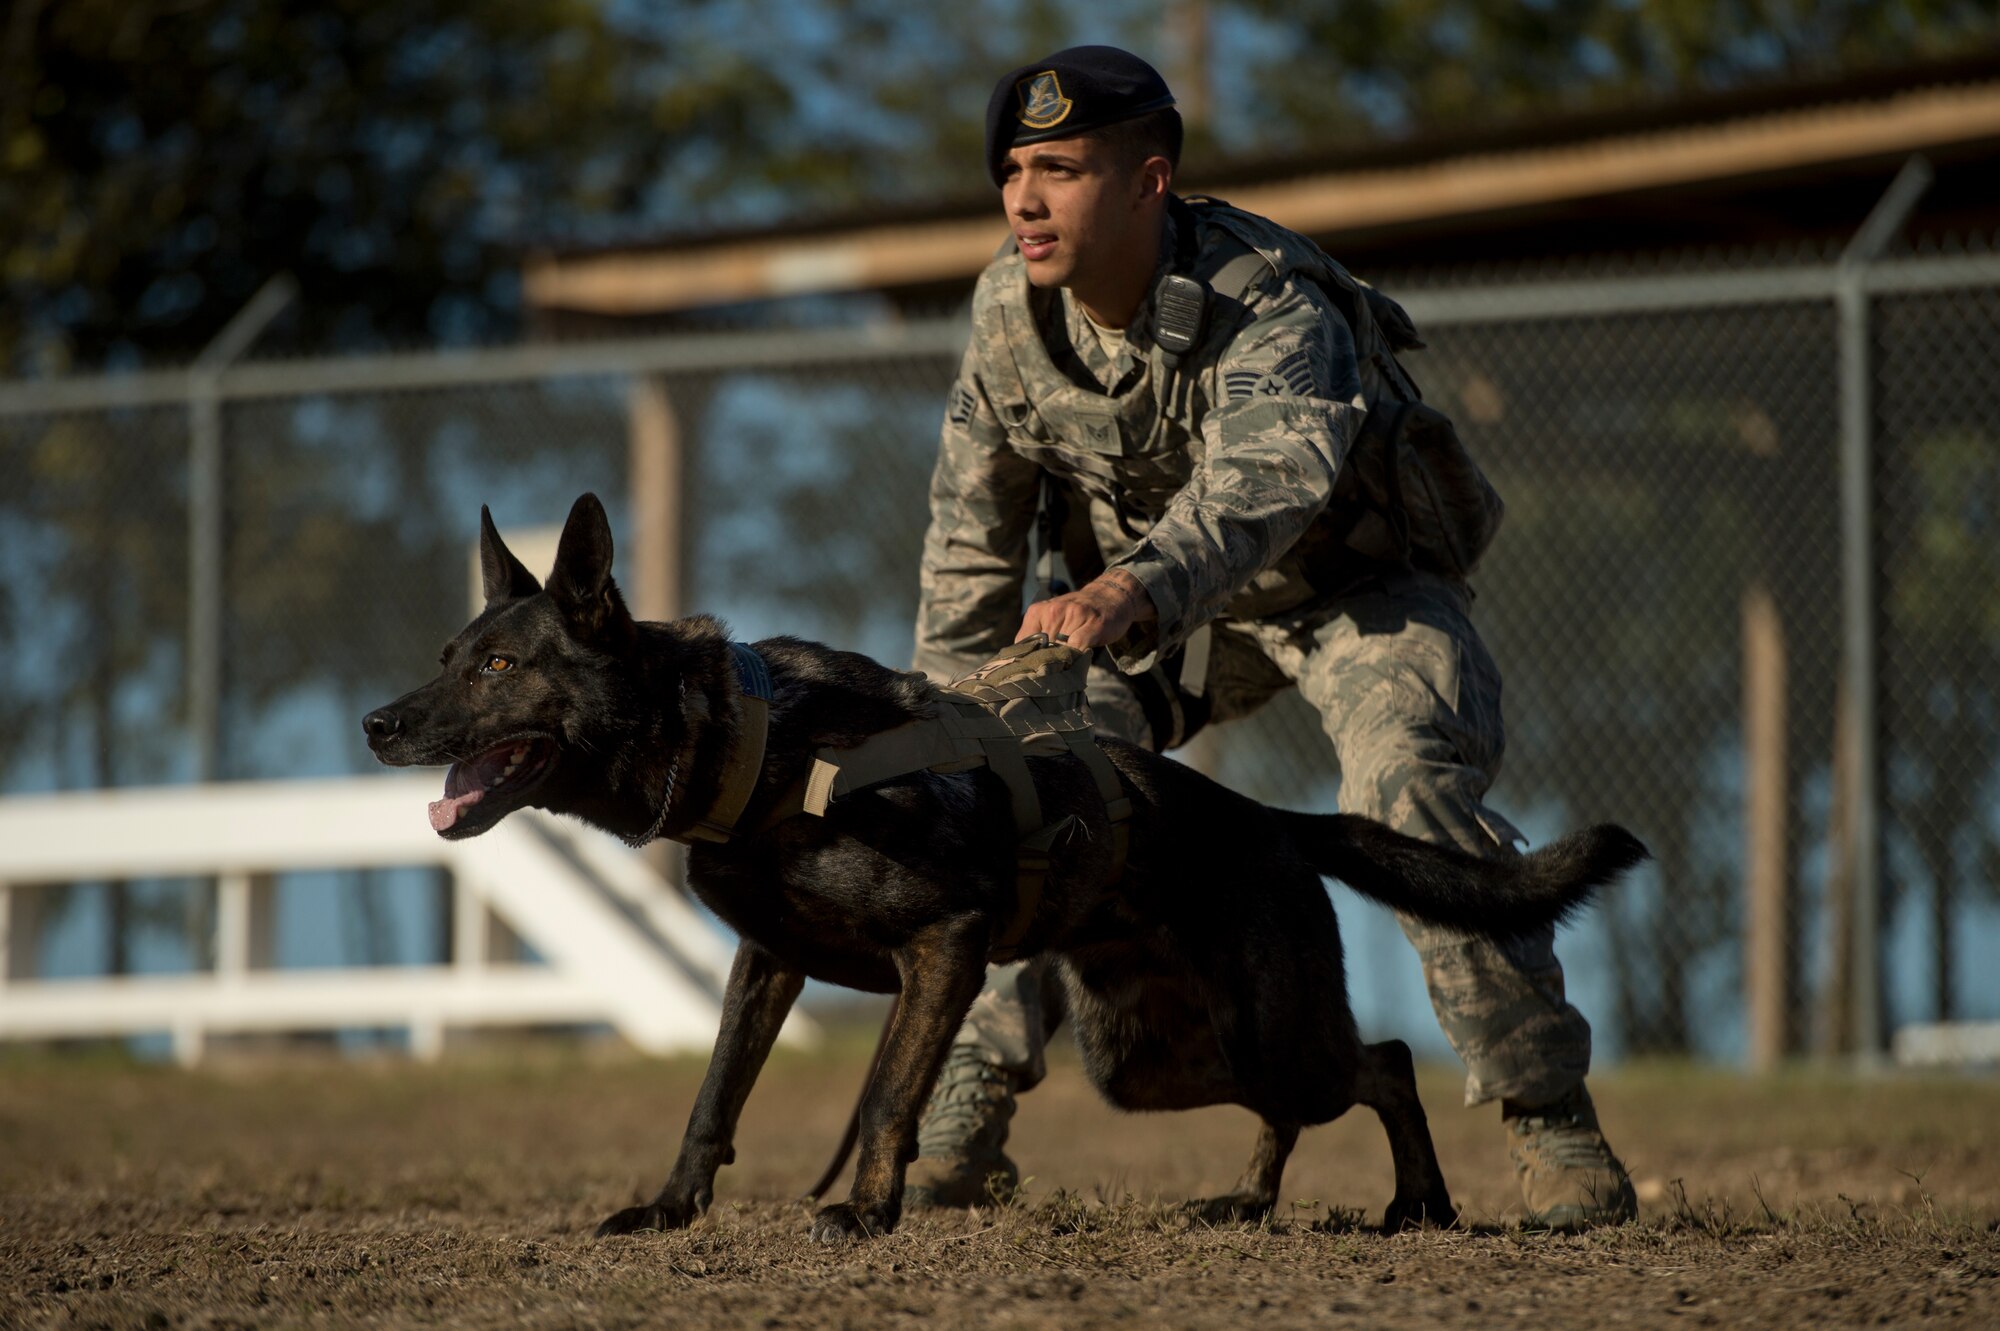 Staff Sgt. Mark Devine, a military working dog handler from the 802nd Security Forces Squadron, prepares to release JJany during a controlled aggression exercise at Joint Base San Antonio-Lackland. Devine and military working dog handlers assigned to JBSA-Lackland fulfill daily law enforcement requirements or train to remain mission-ready. (U.S. Air force photo/Staff Sgt. Vernon Young Jr.)